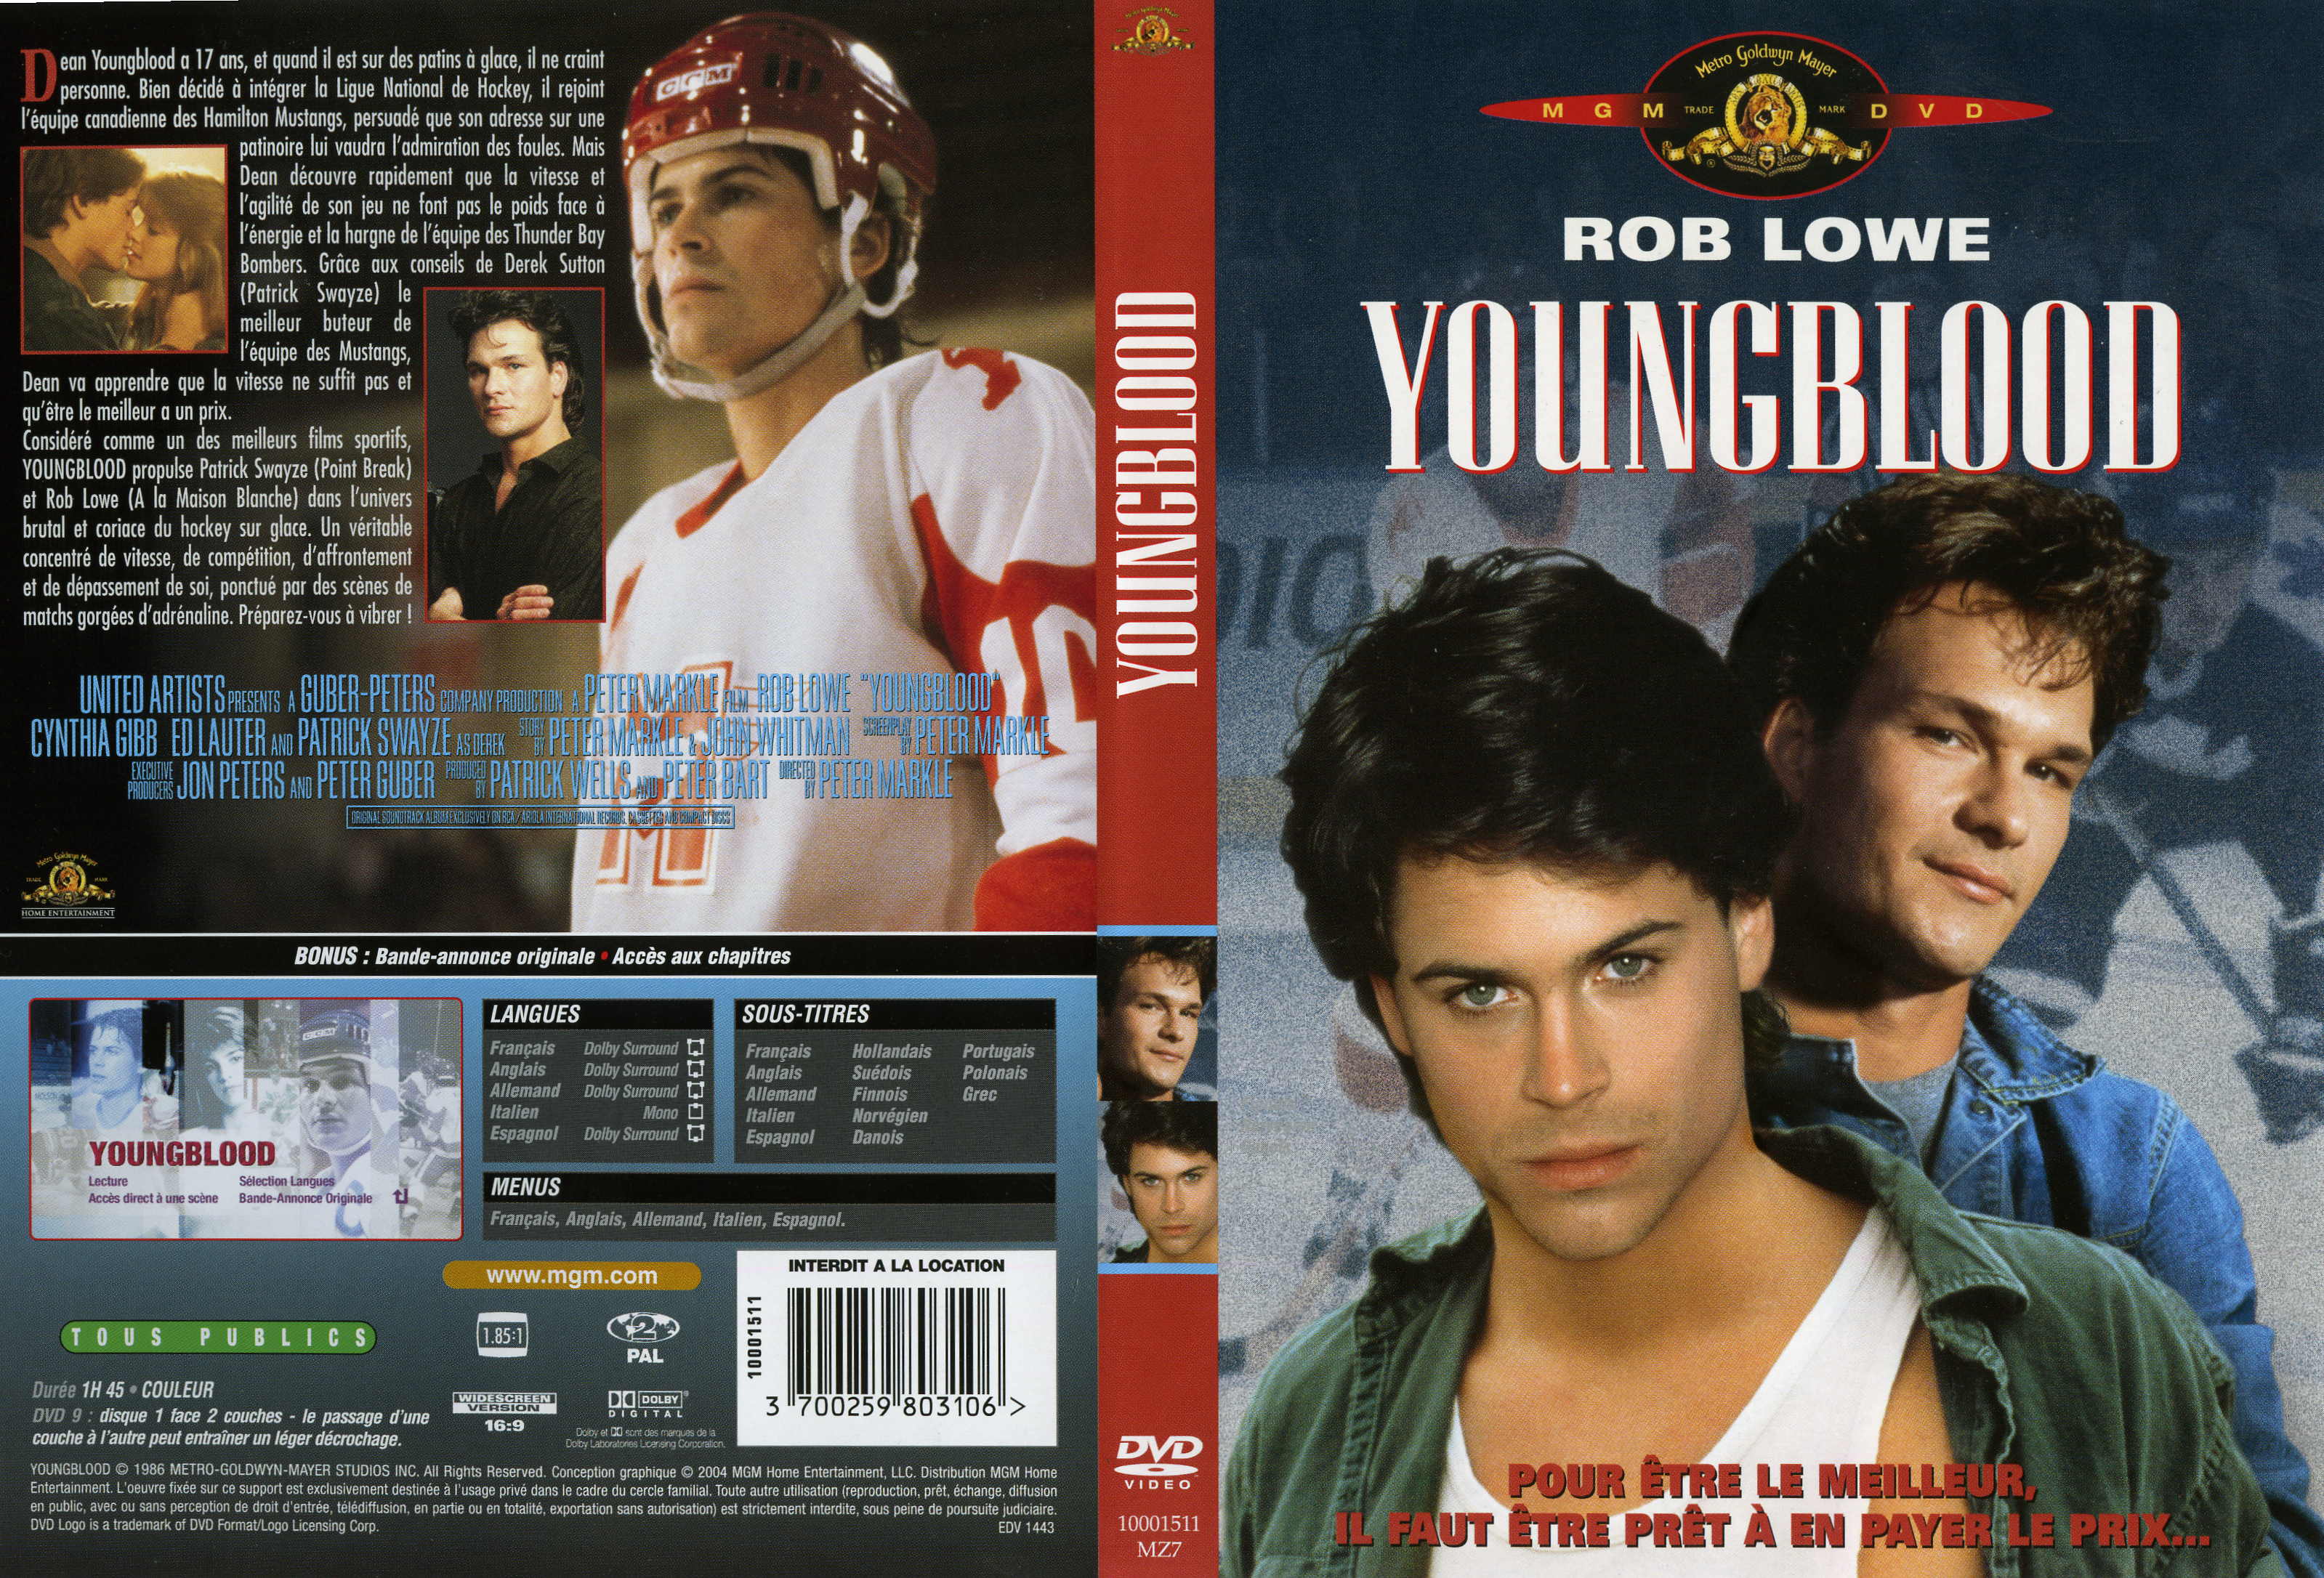 Jaquette DVD Youngblood